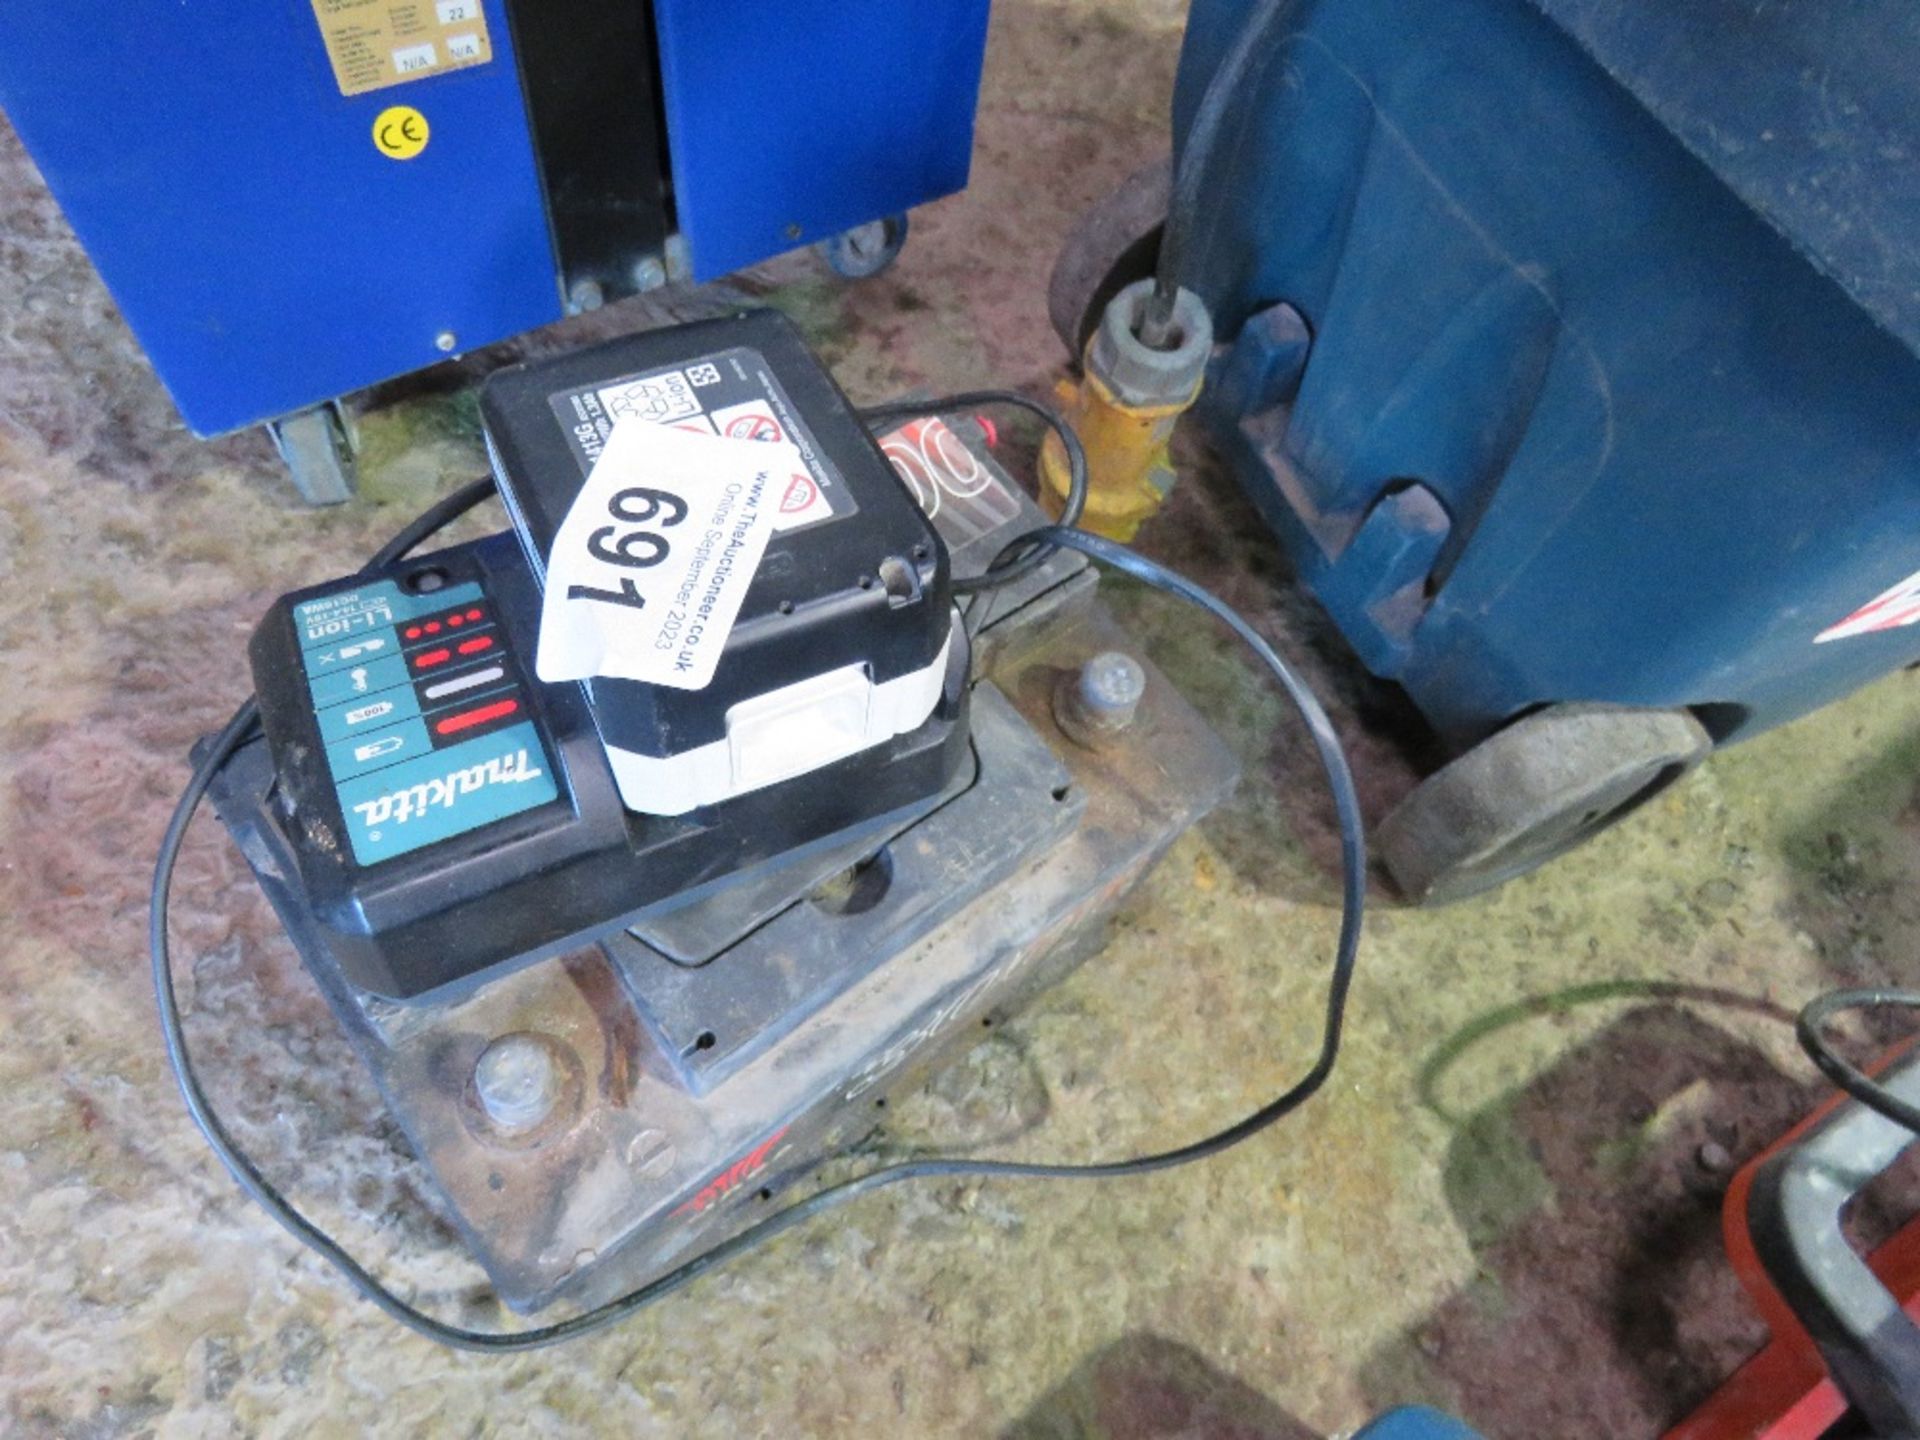 CAR BATTERY WITH A MAKITA BATTERY PLUS CHARGER.